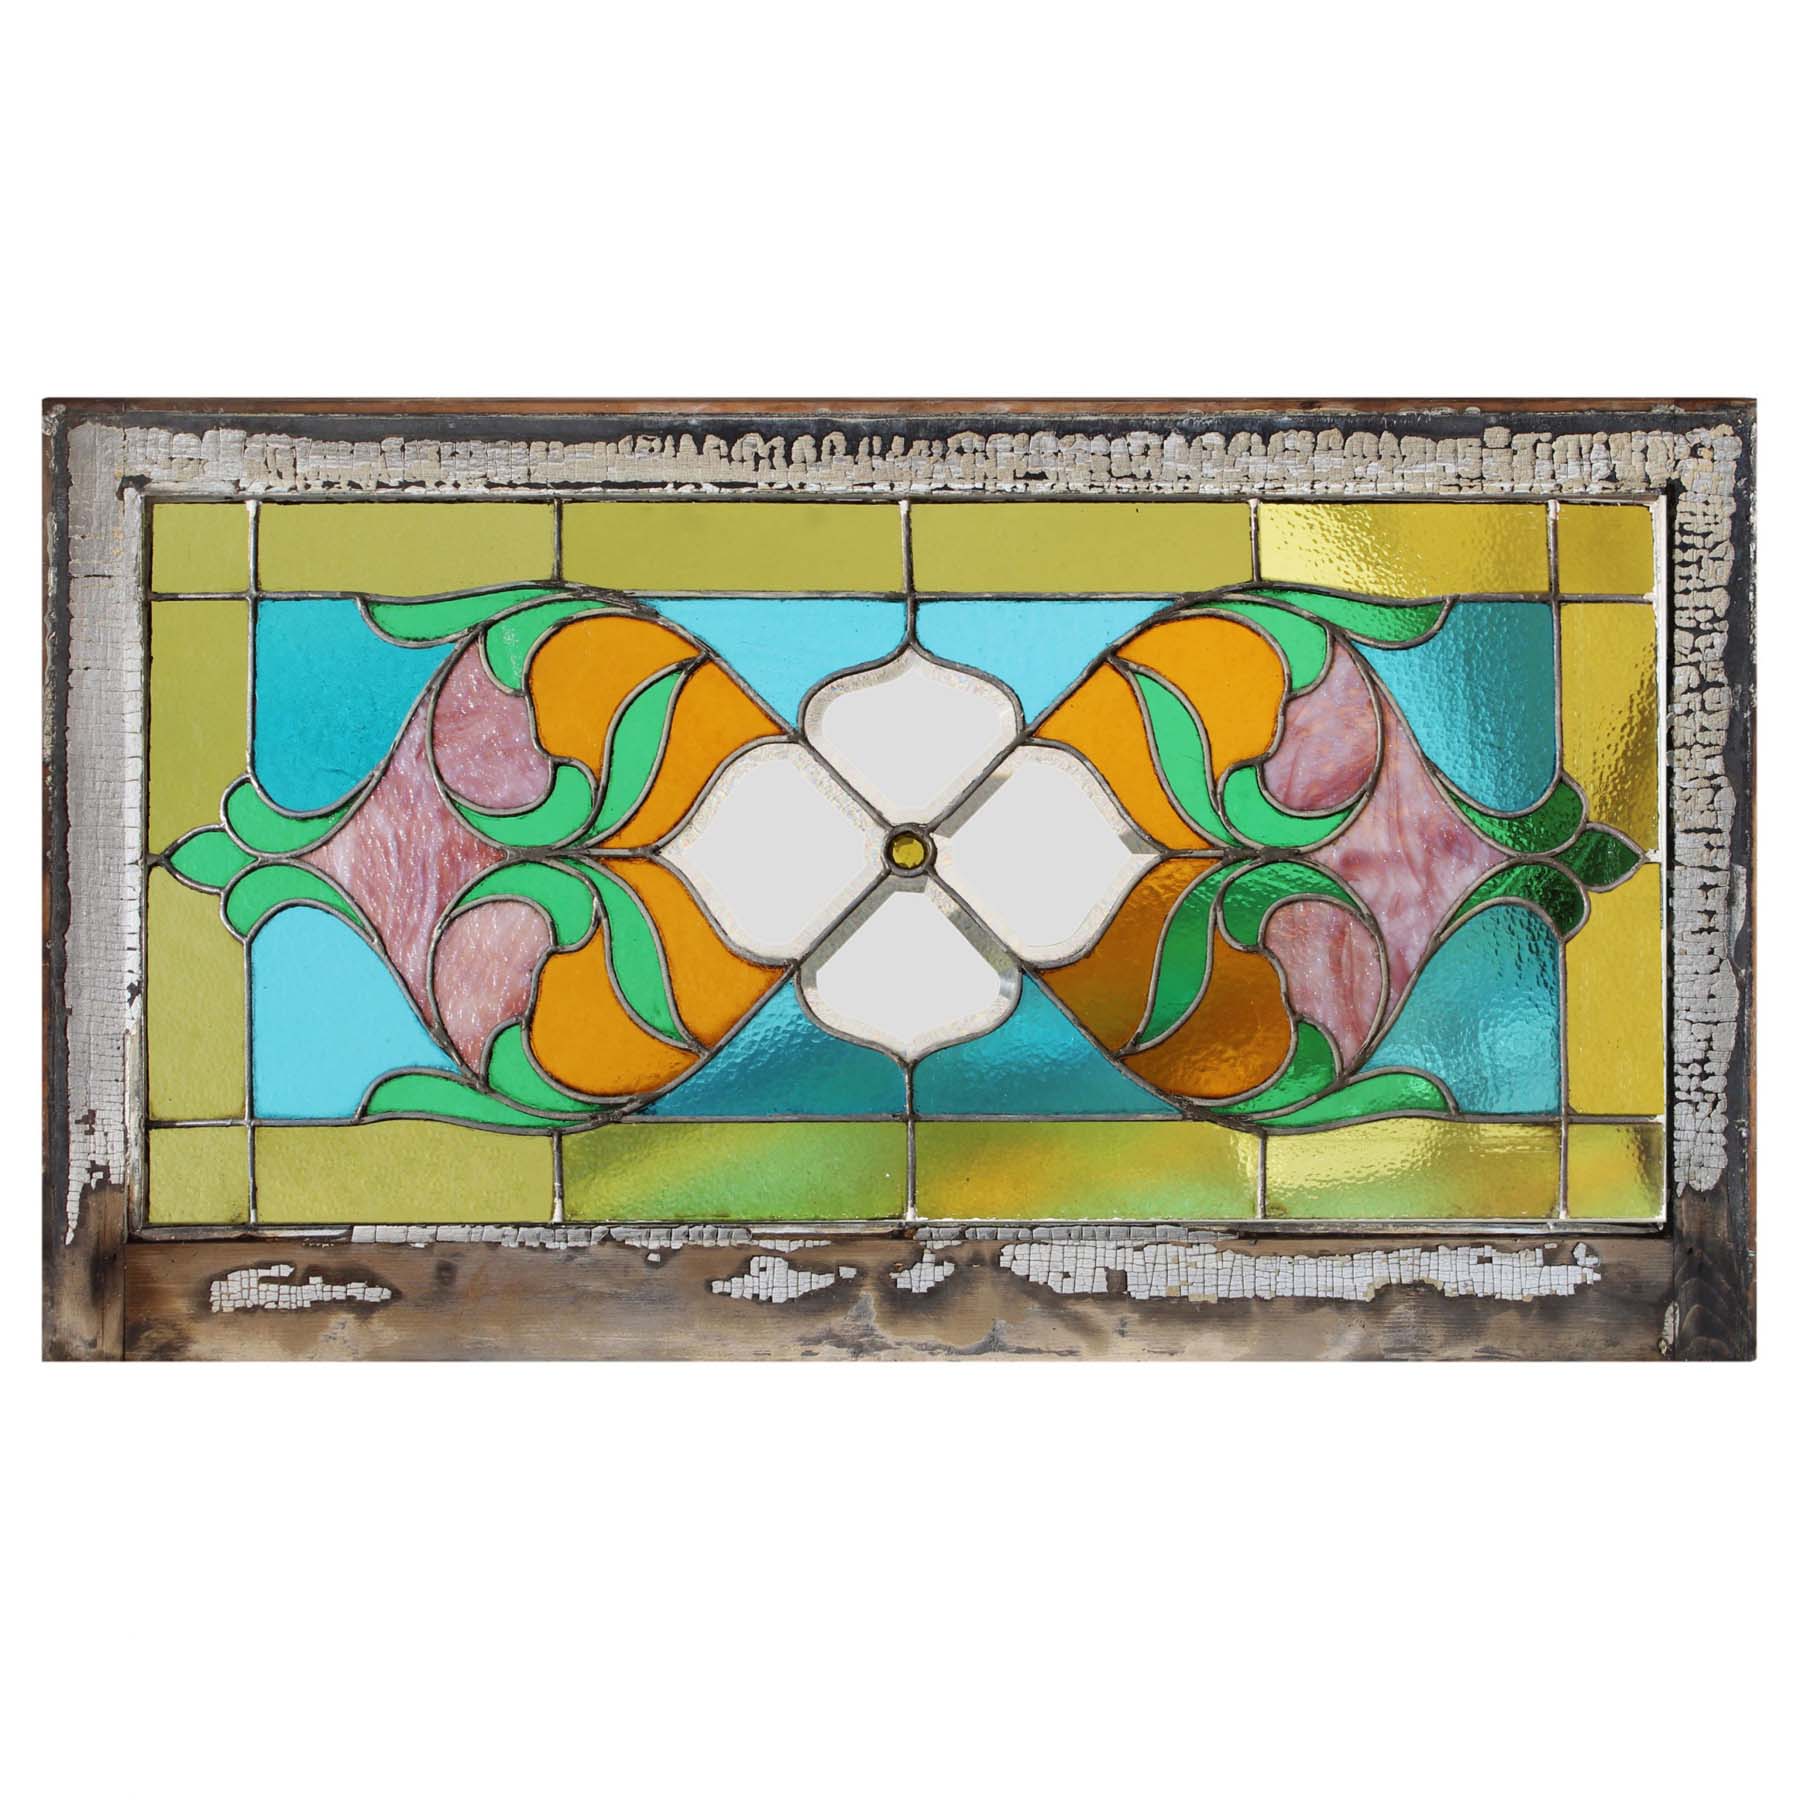 SOLD Antique American Stained Glass Transom with Flowers, c. 1900's-69279